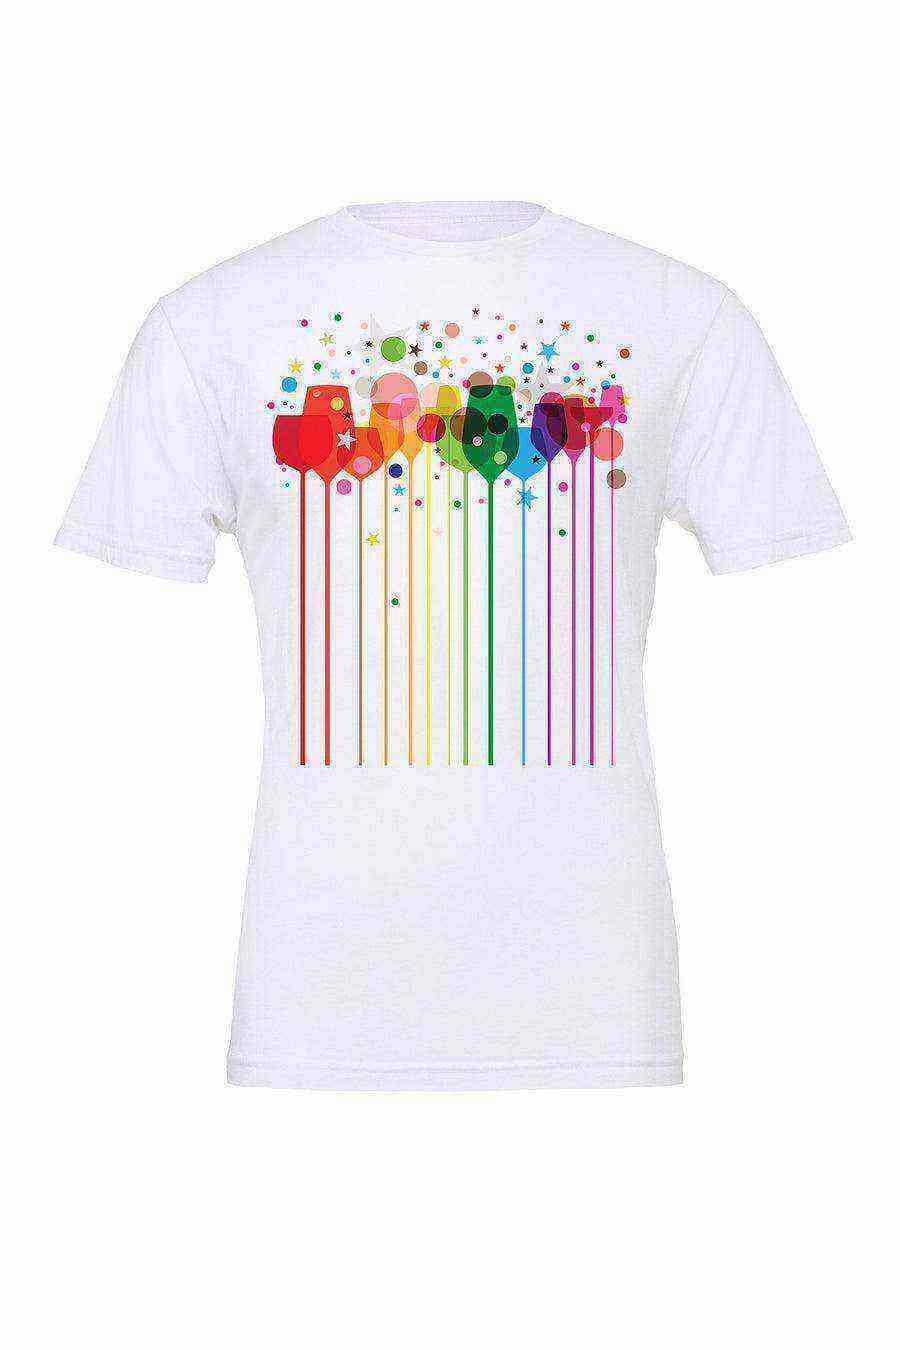 Colorful Wine Glasses shirt | Wine Shirt | Wine Glasses - Dylan's Tees